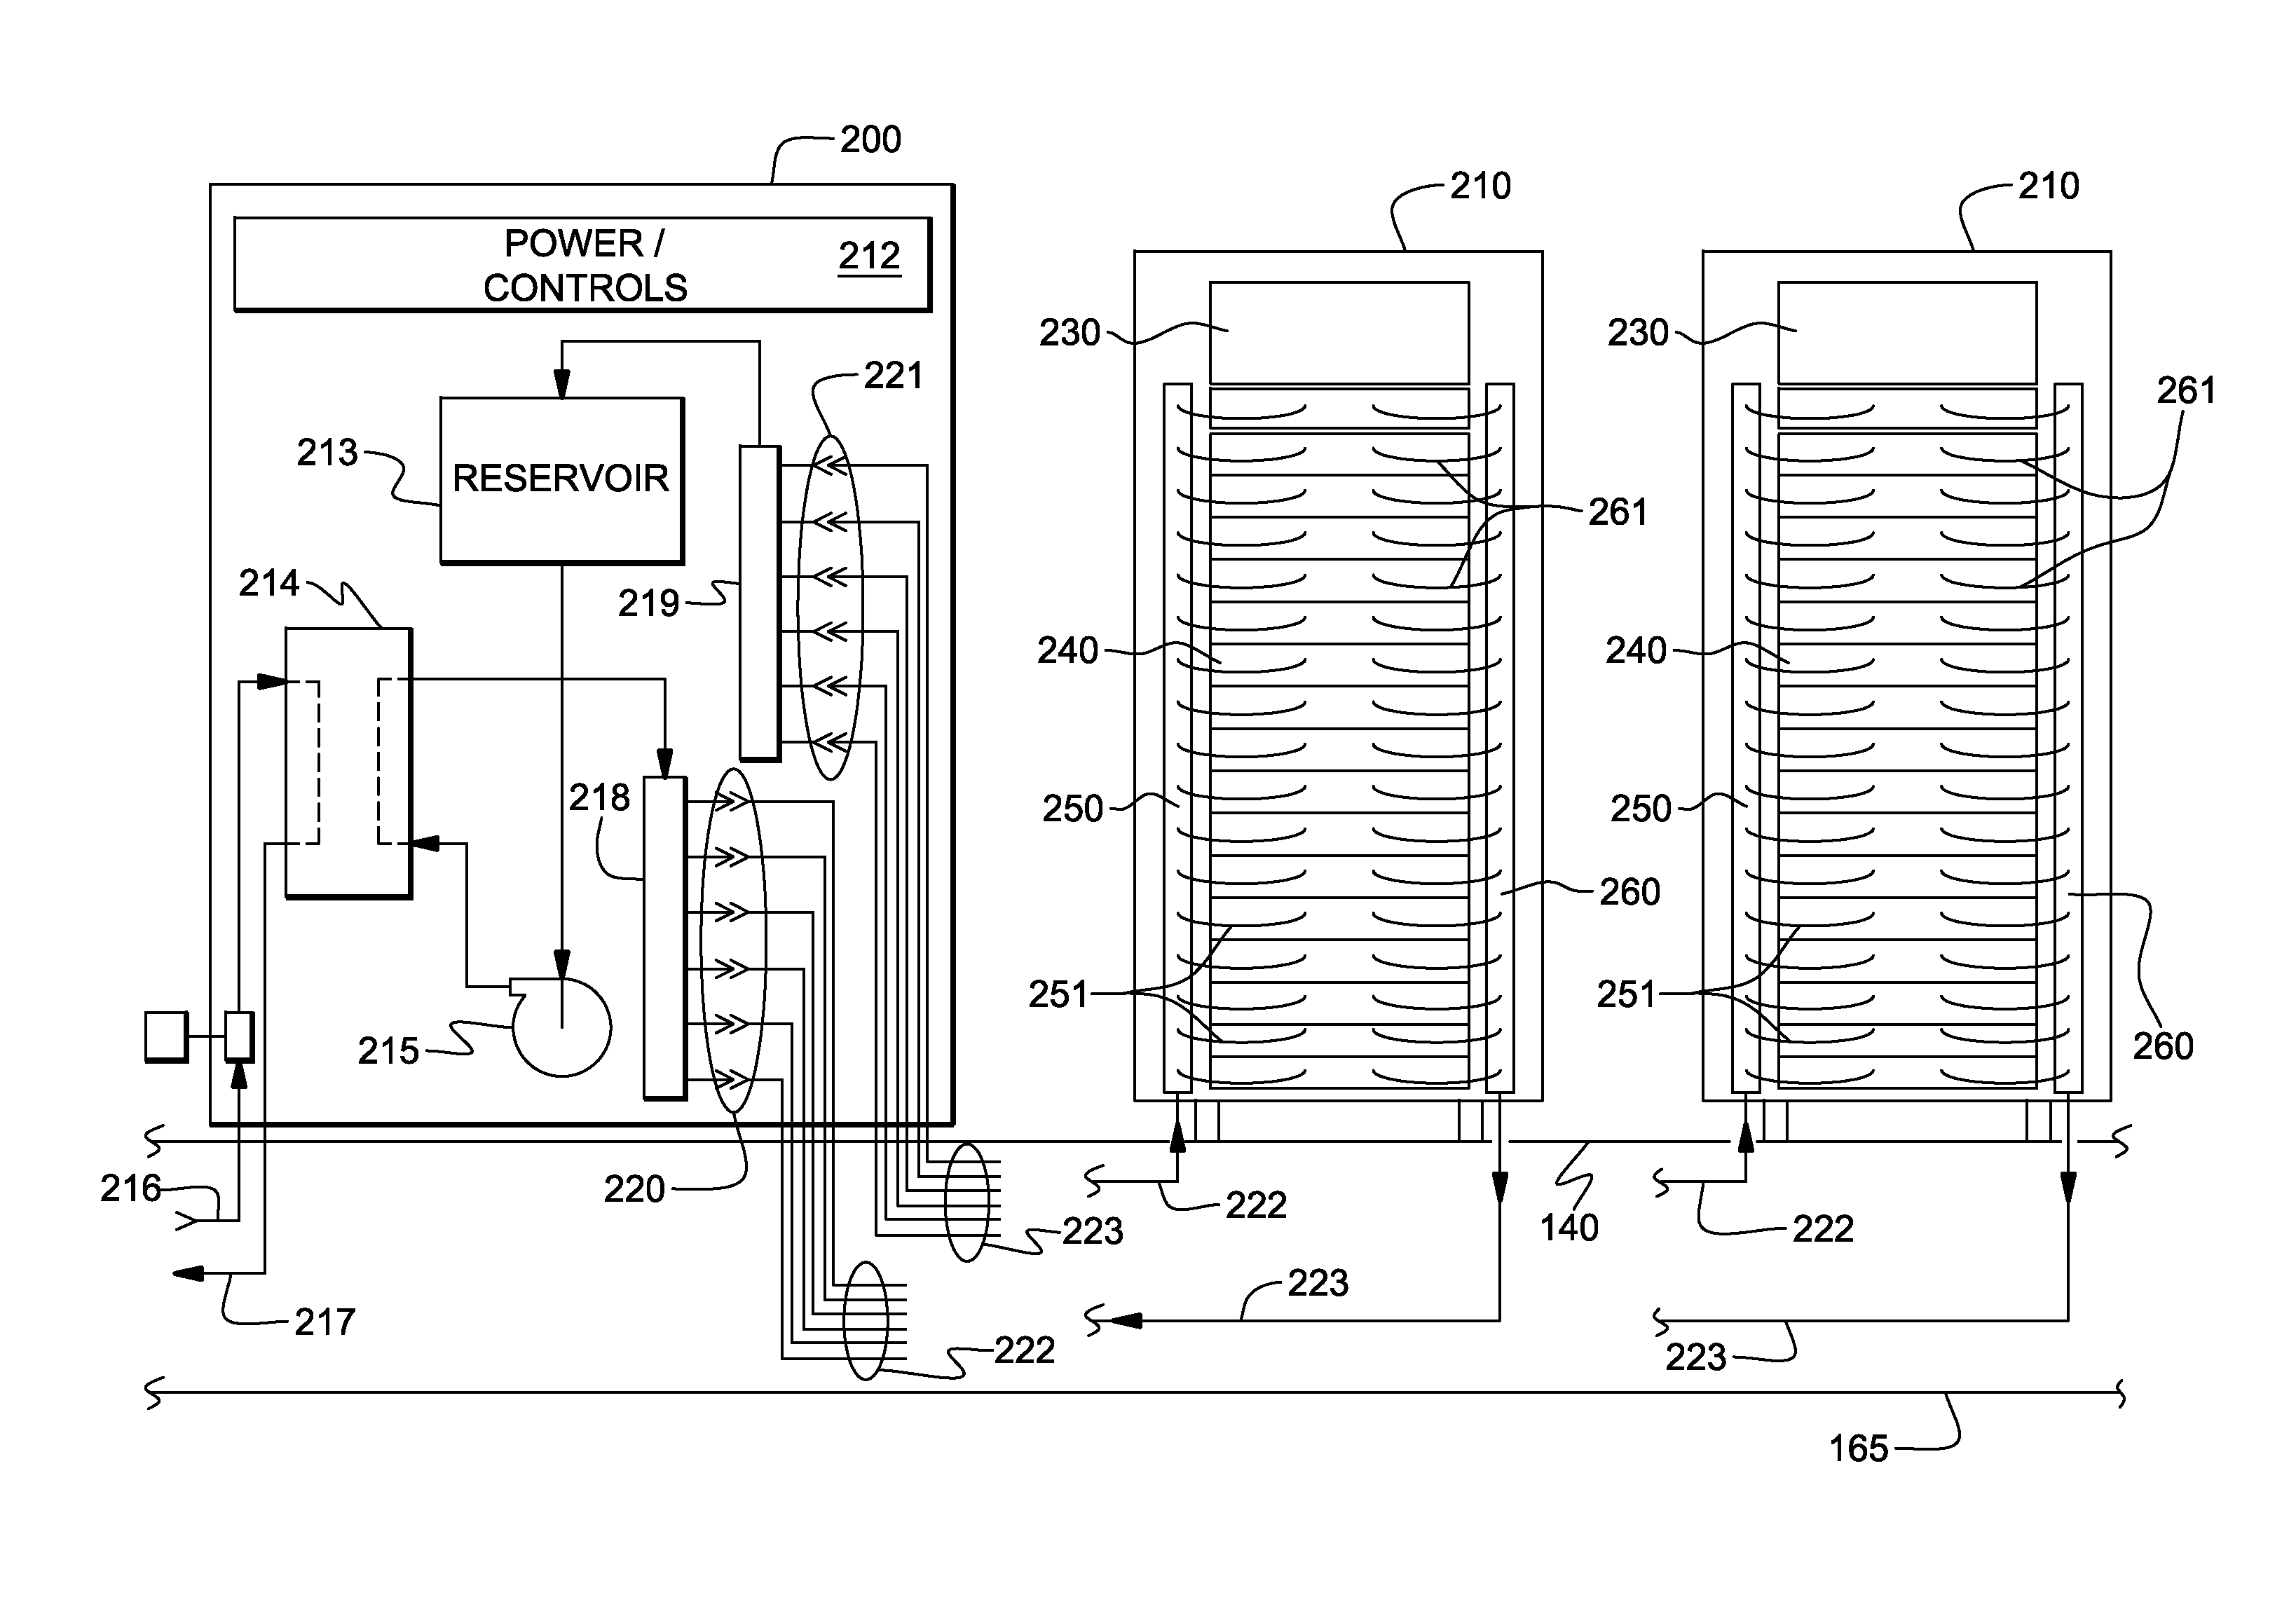 Coolant-cooled heat sink configured for accelerating coolant flow